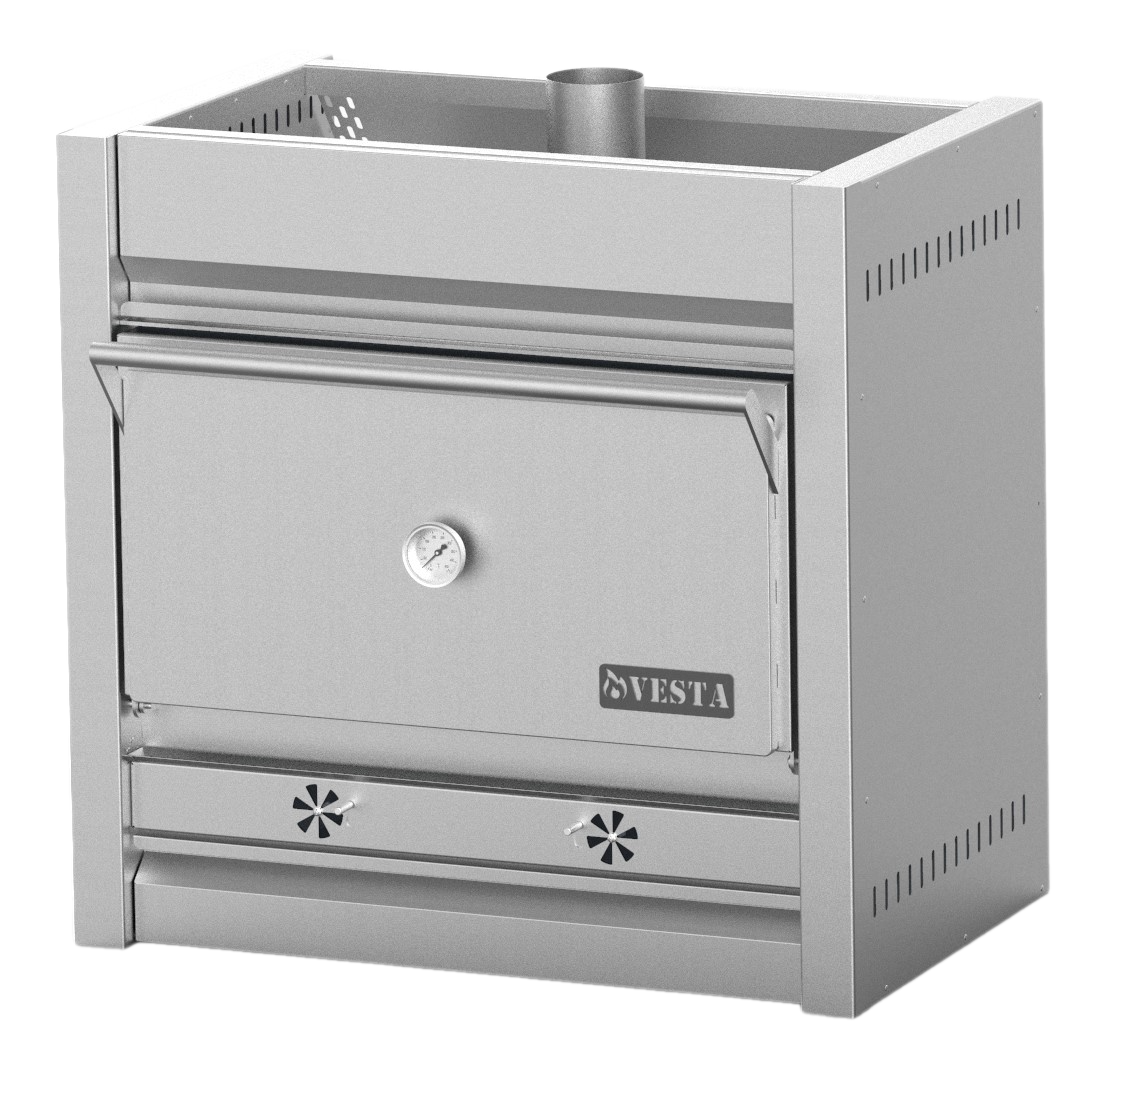 VESTA M45SD Vesta Charcoal  Oven M45 with Stand, Heating  Cabinet, Dry Spark  arrester, Cast iron  fire grate